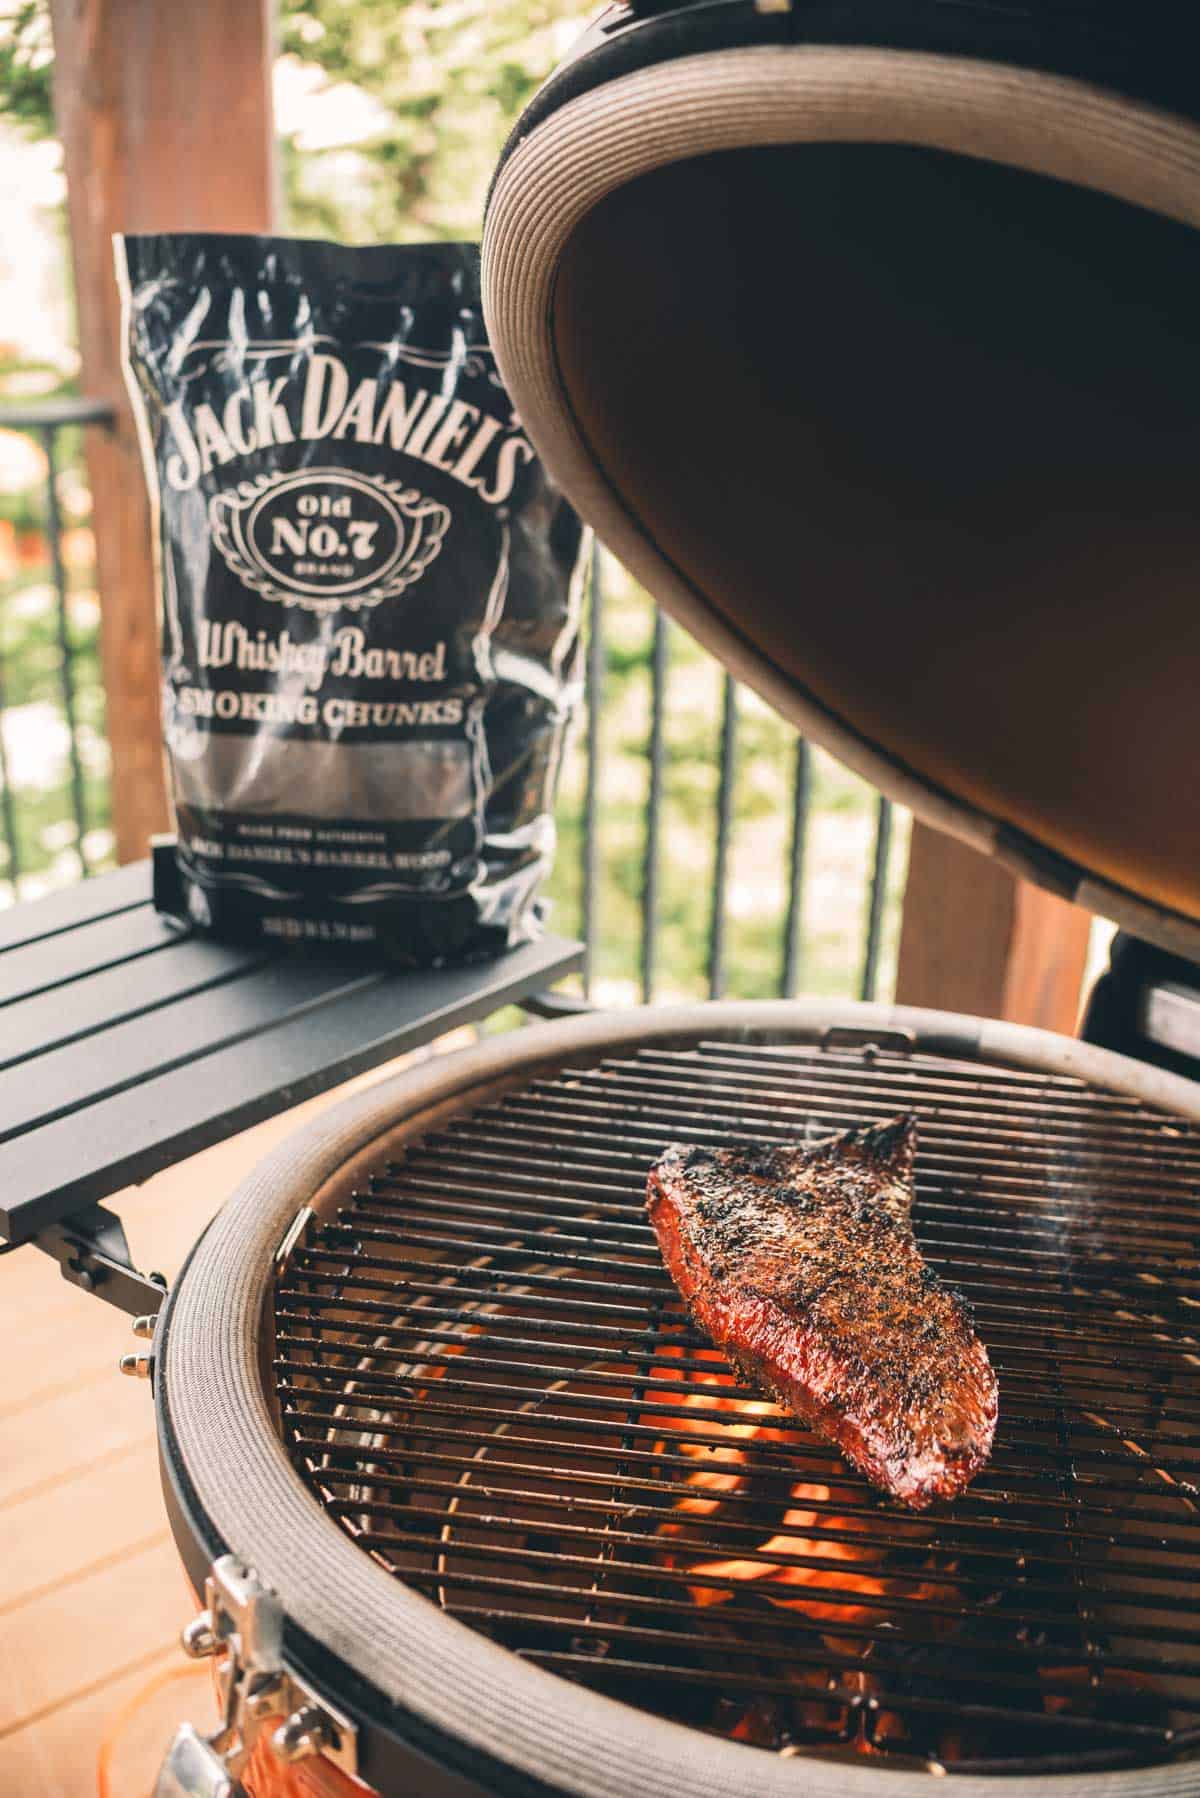 A seasoned steak cooks on a grill with glowing coals beneath. A bag of Jack Daniel's Whiskey Barrel Smoking Chunks is placed next to the grill.